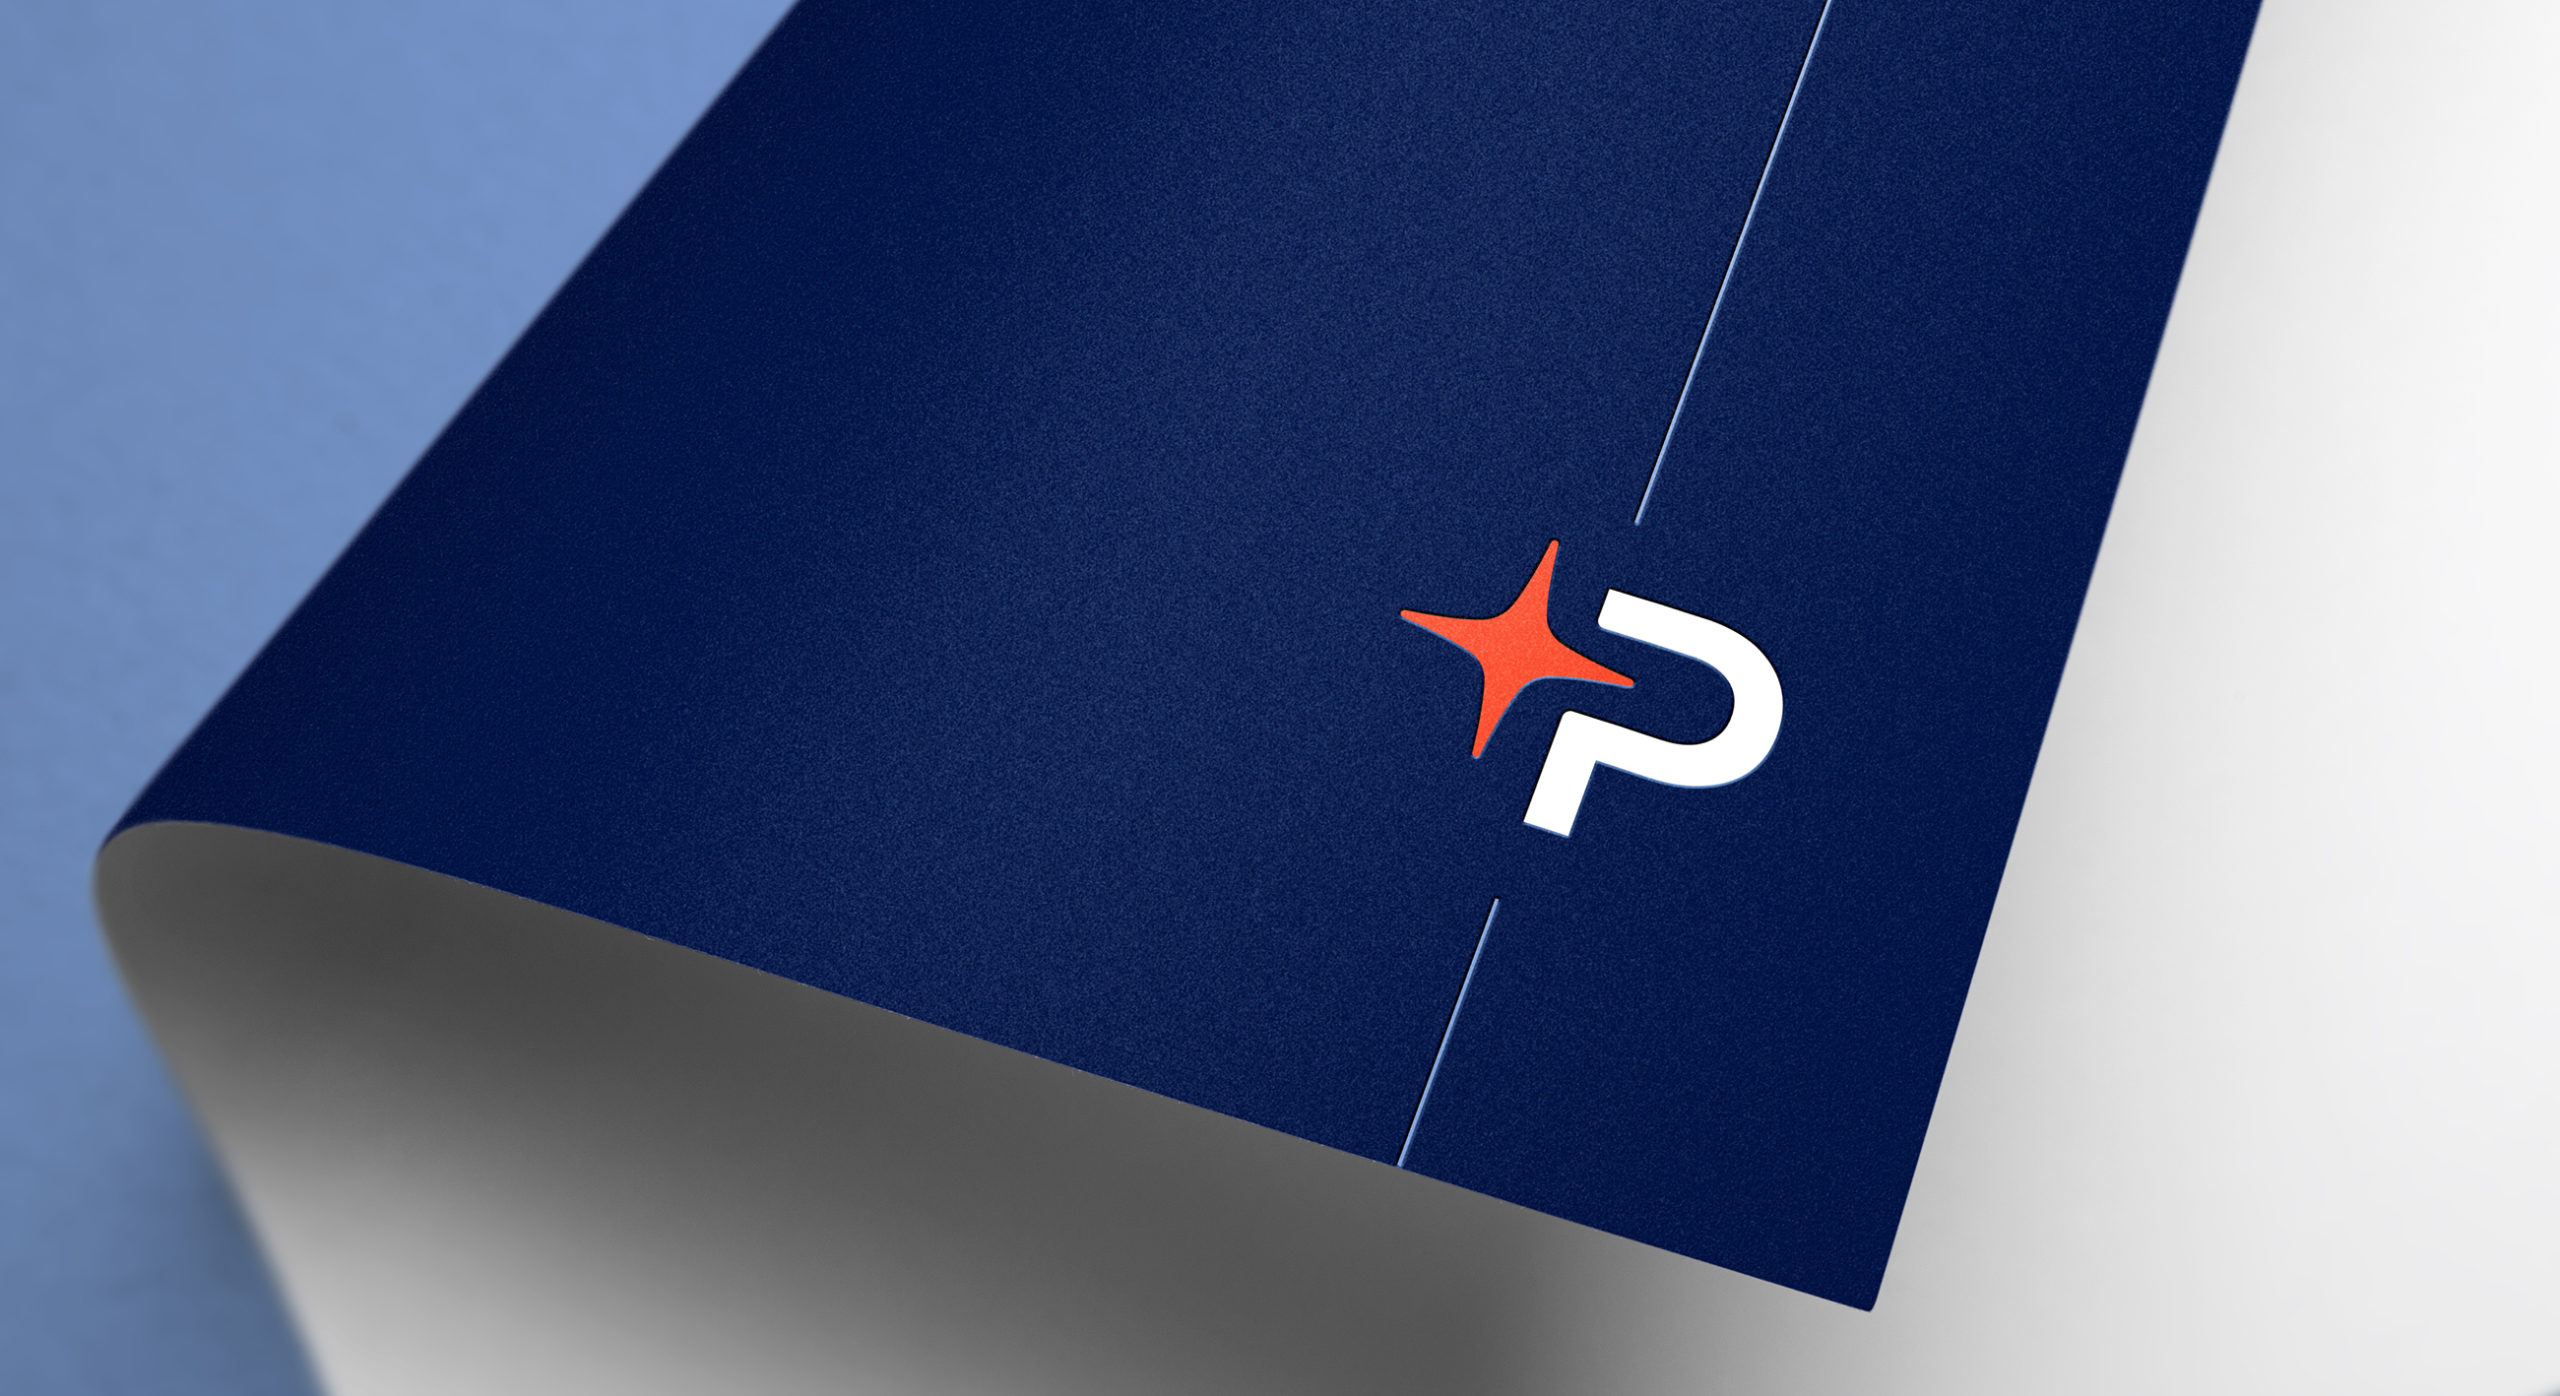 The branding can also be used as a decorative device whereby only the P initial and star element is used in conjunction with a blue line which anchors the element to page margins.